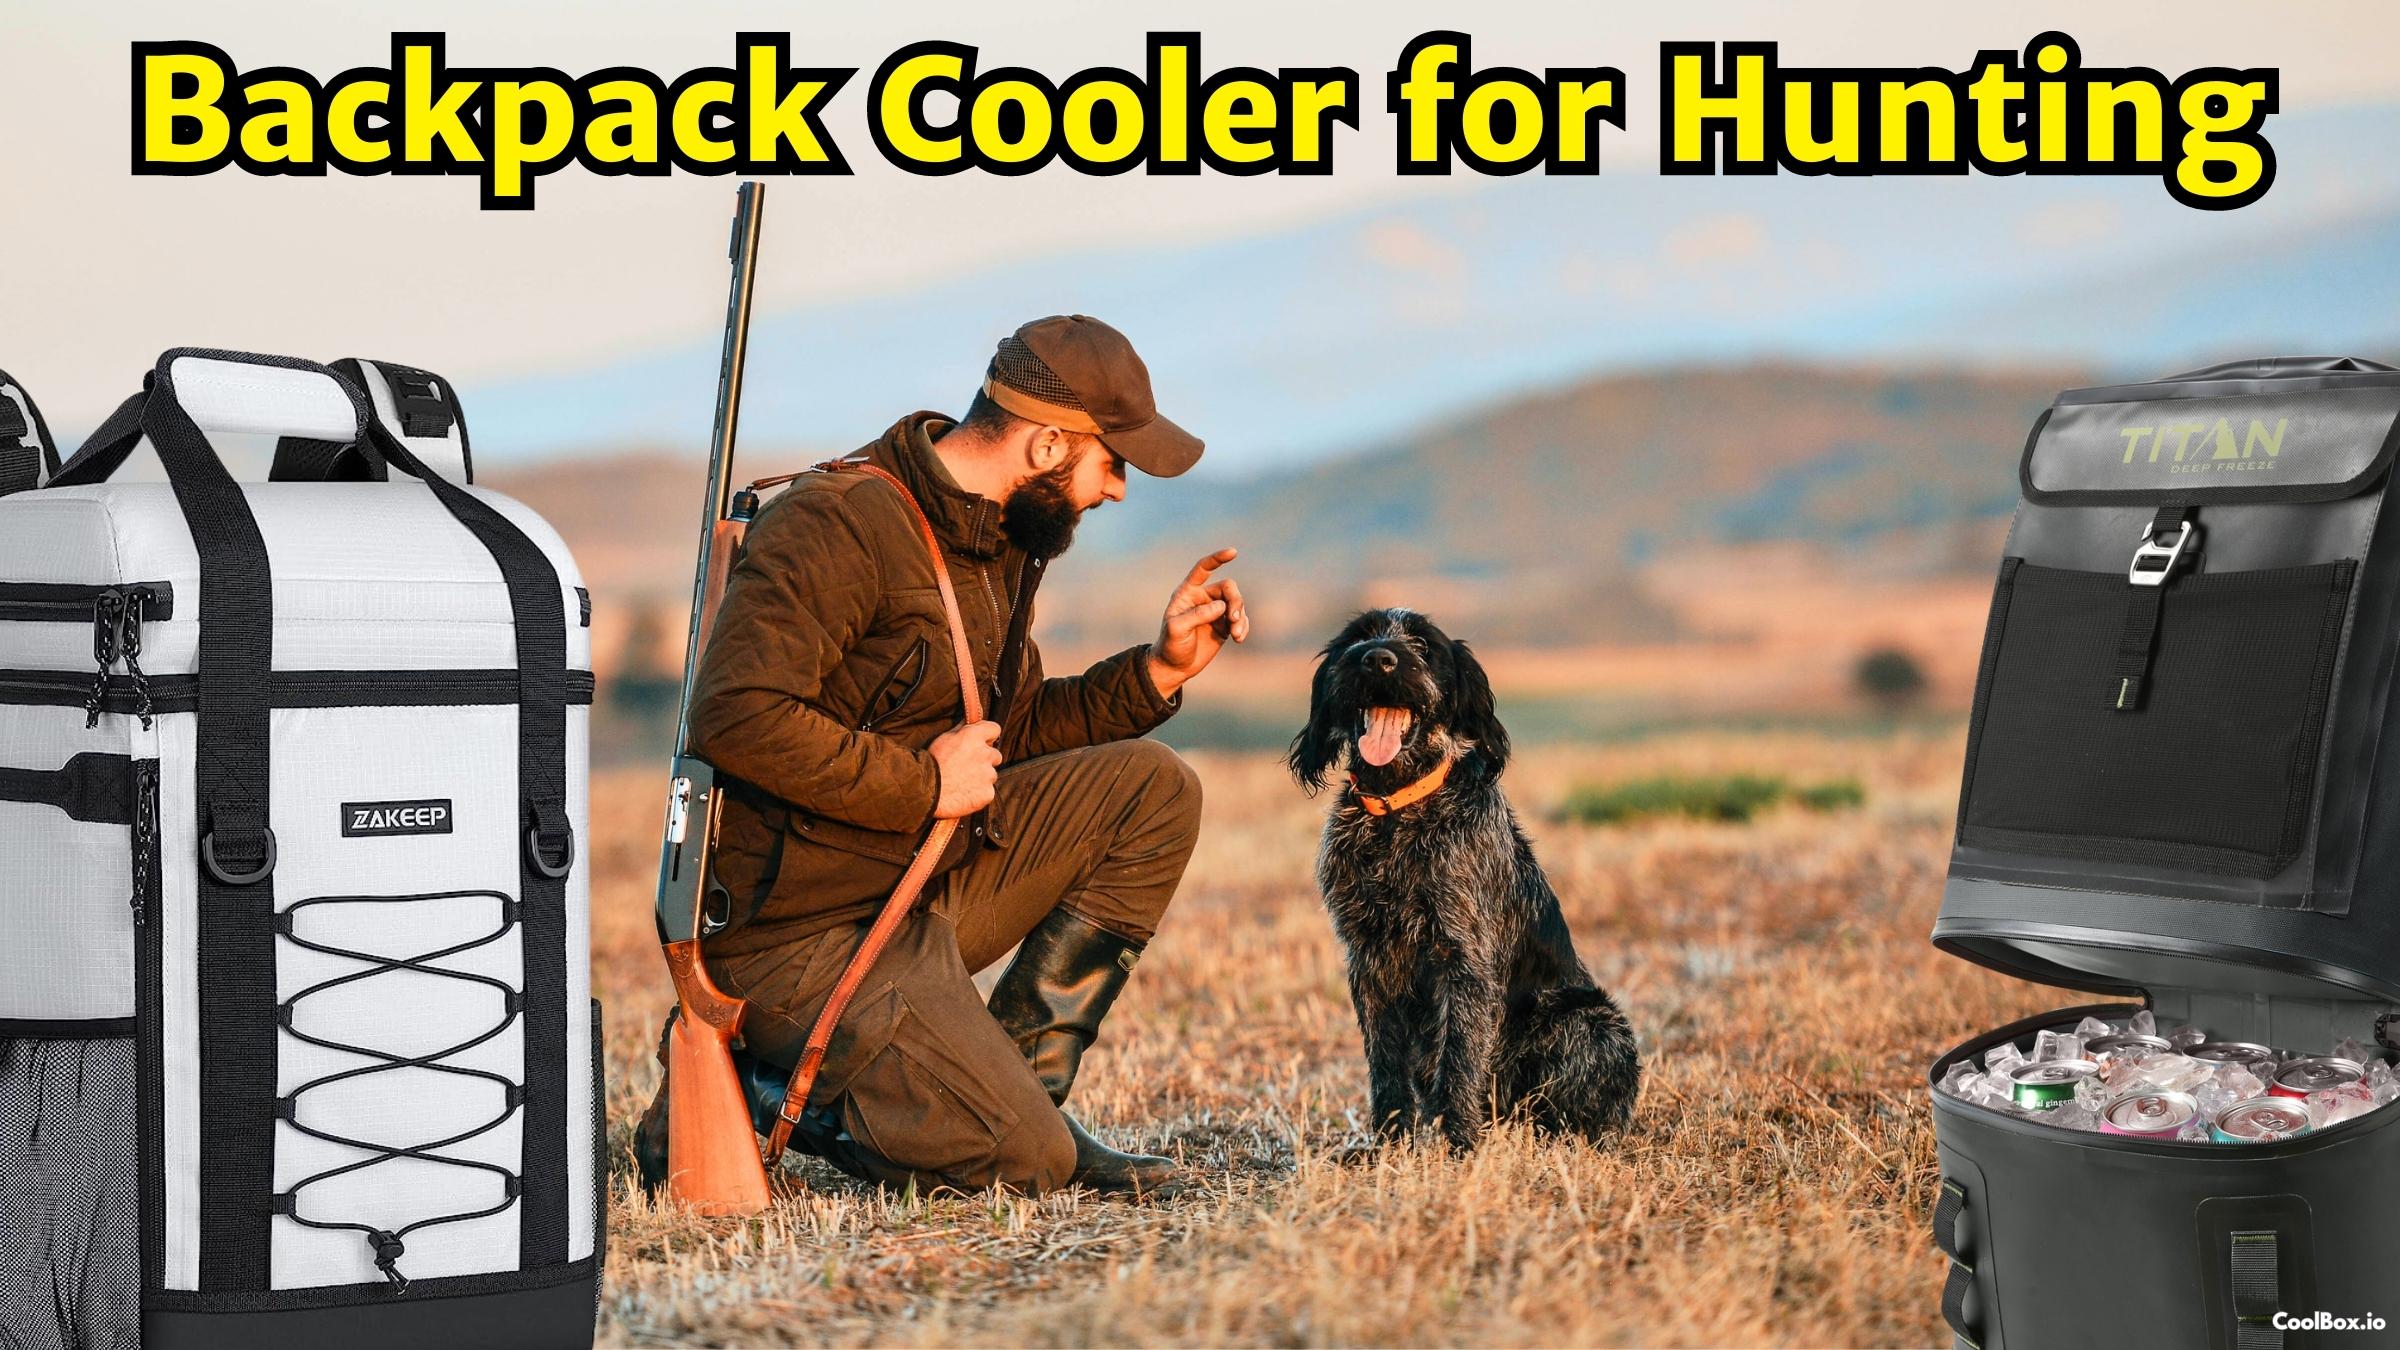 Can You Take A Backpack Cooler For Hunting?